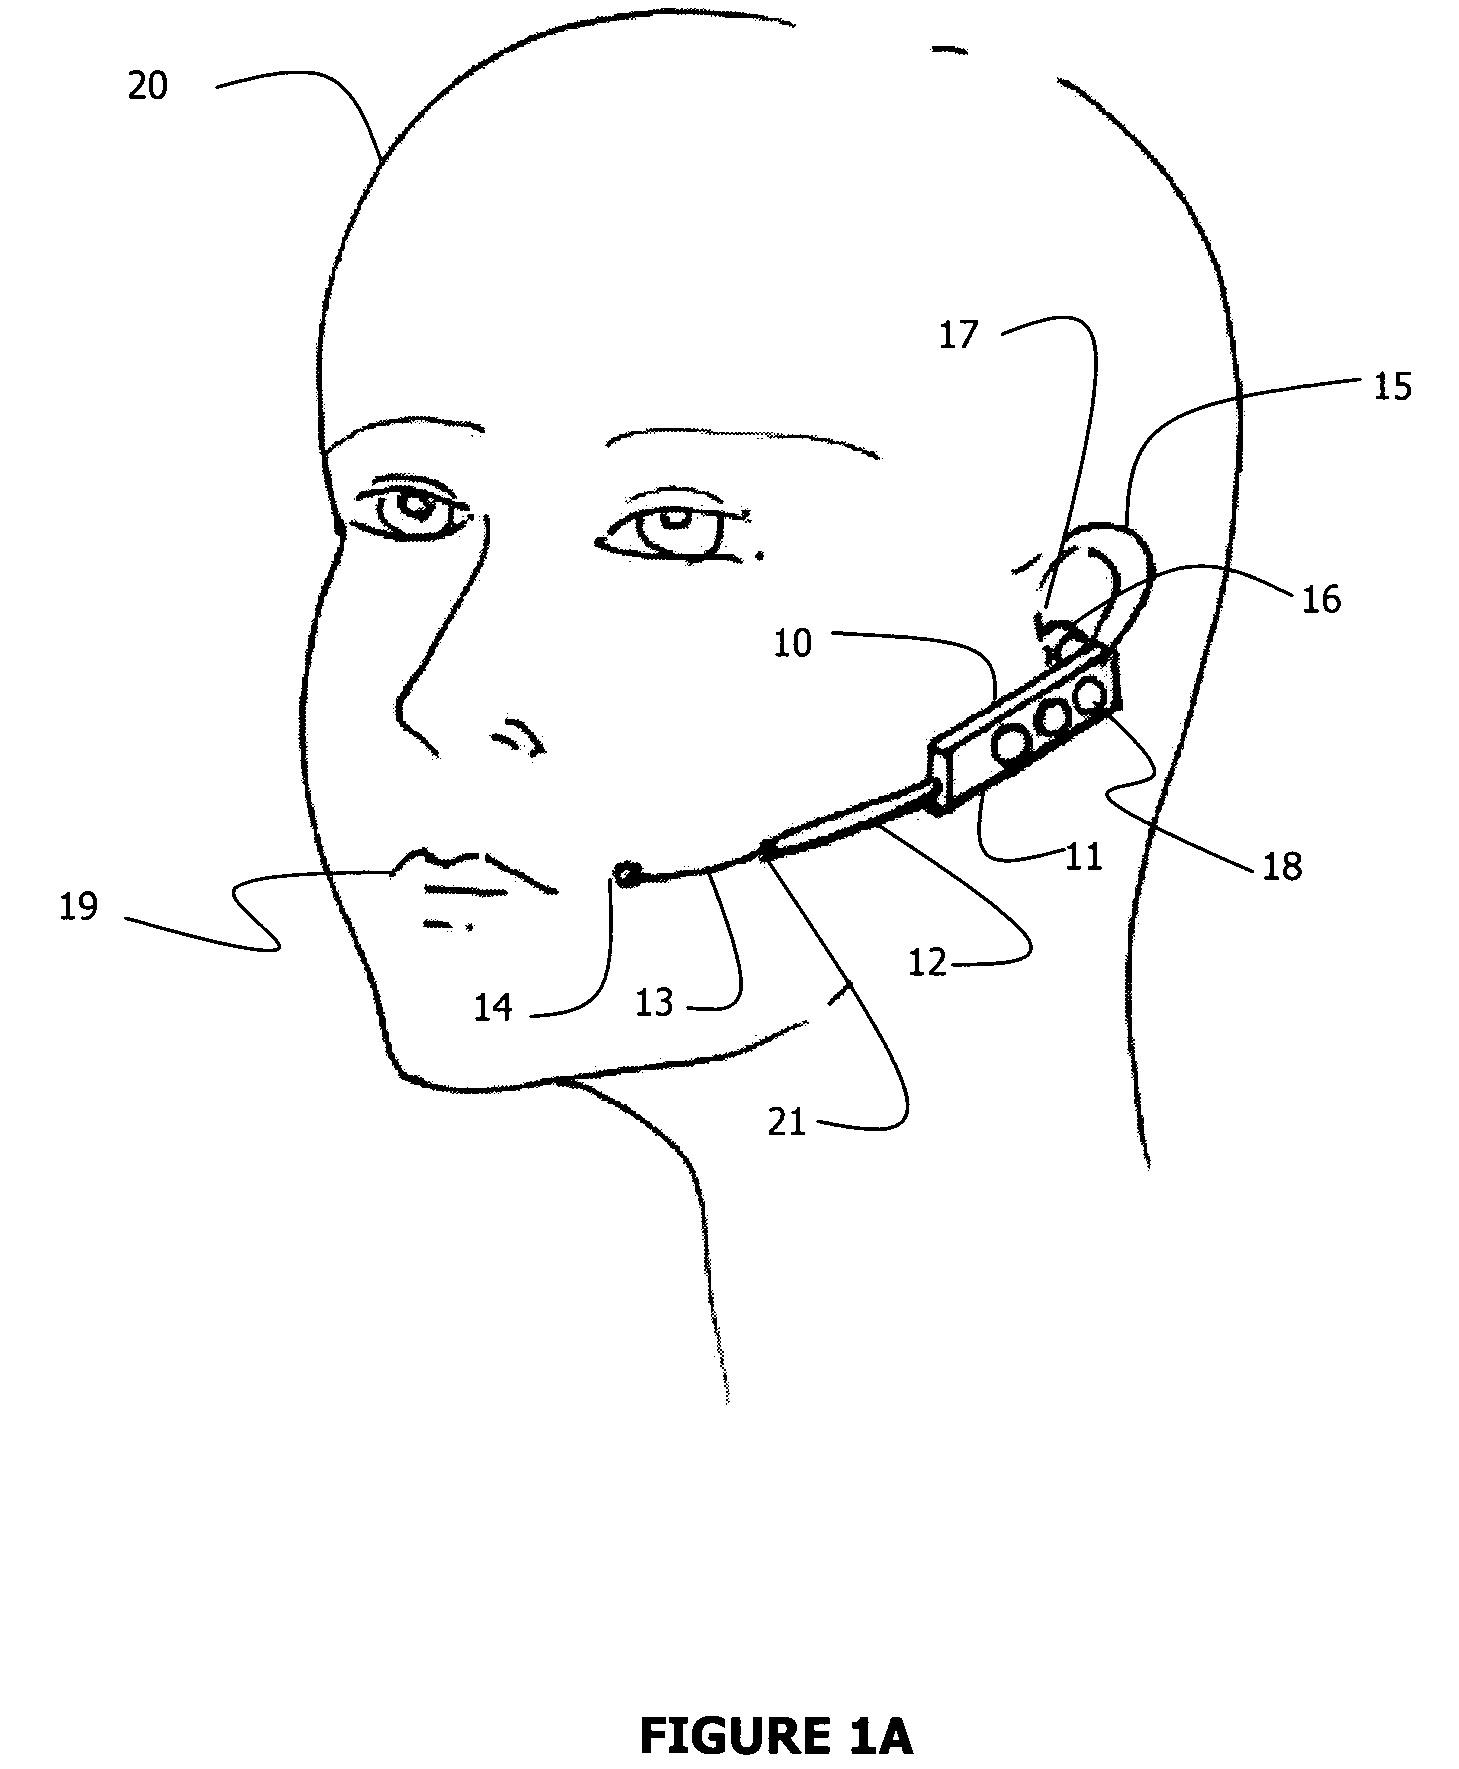 Wireless headset with microphone boom with new bending properties